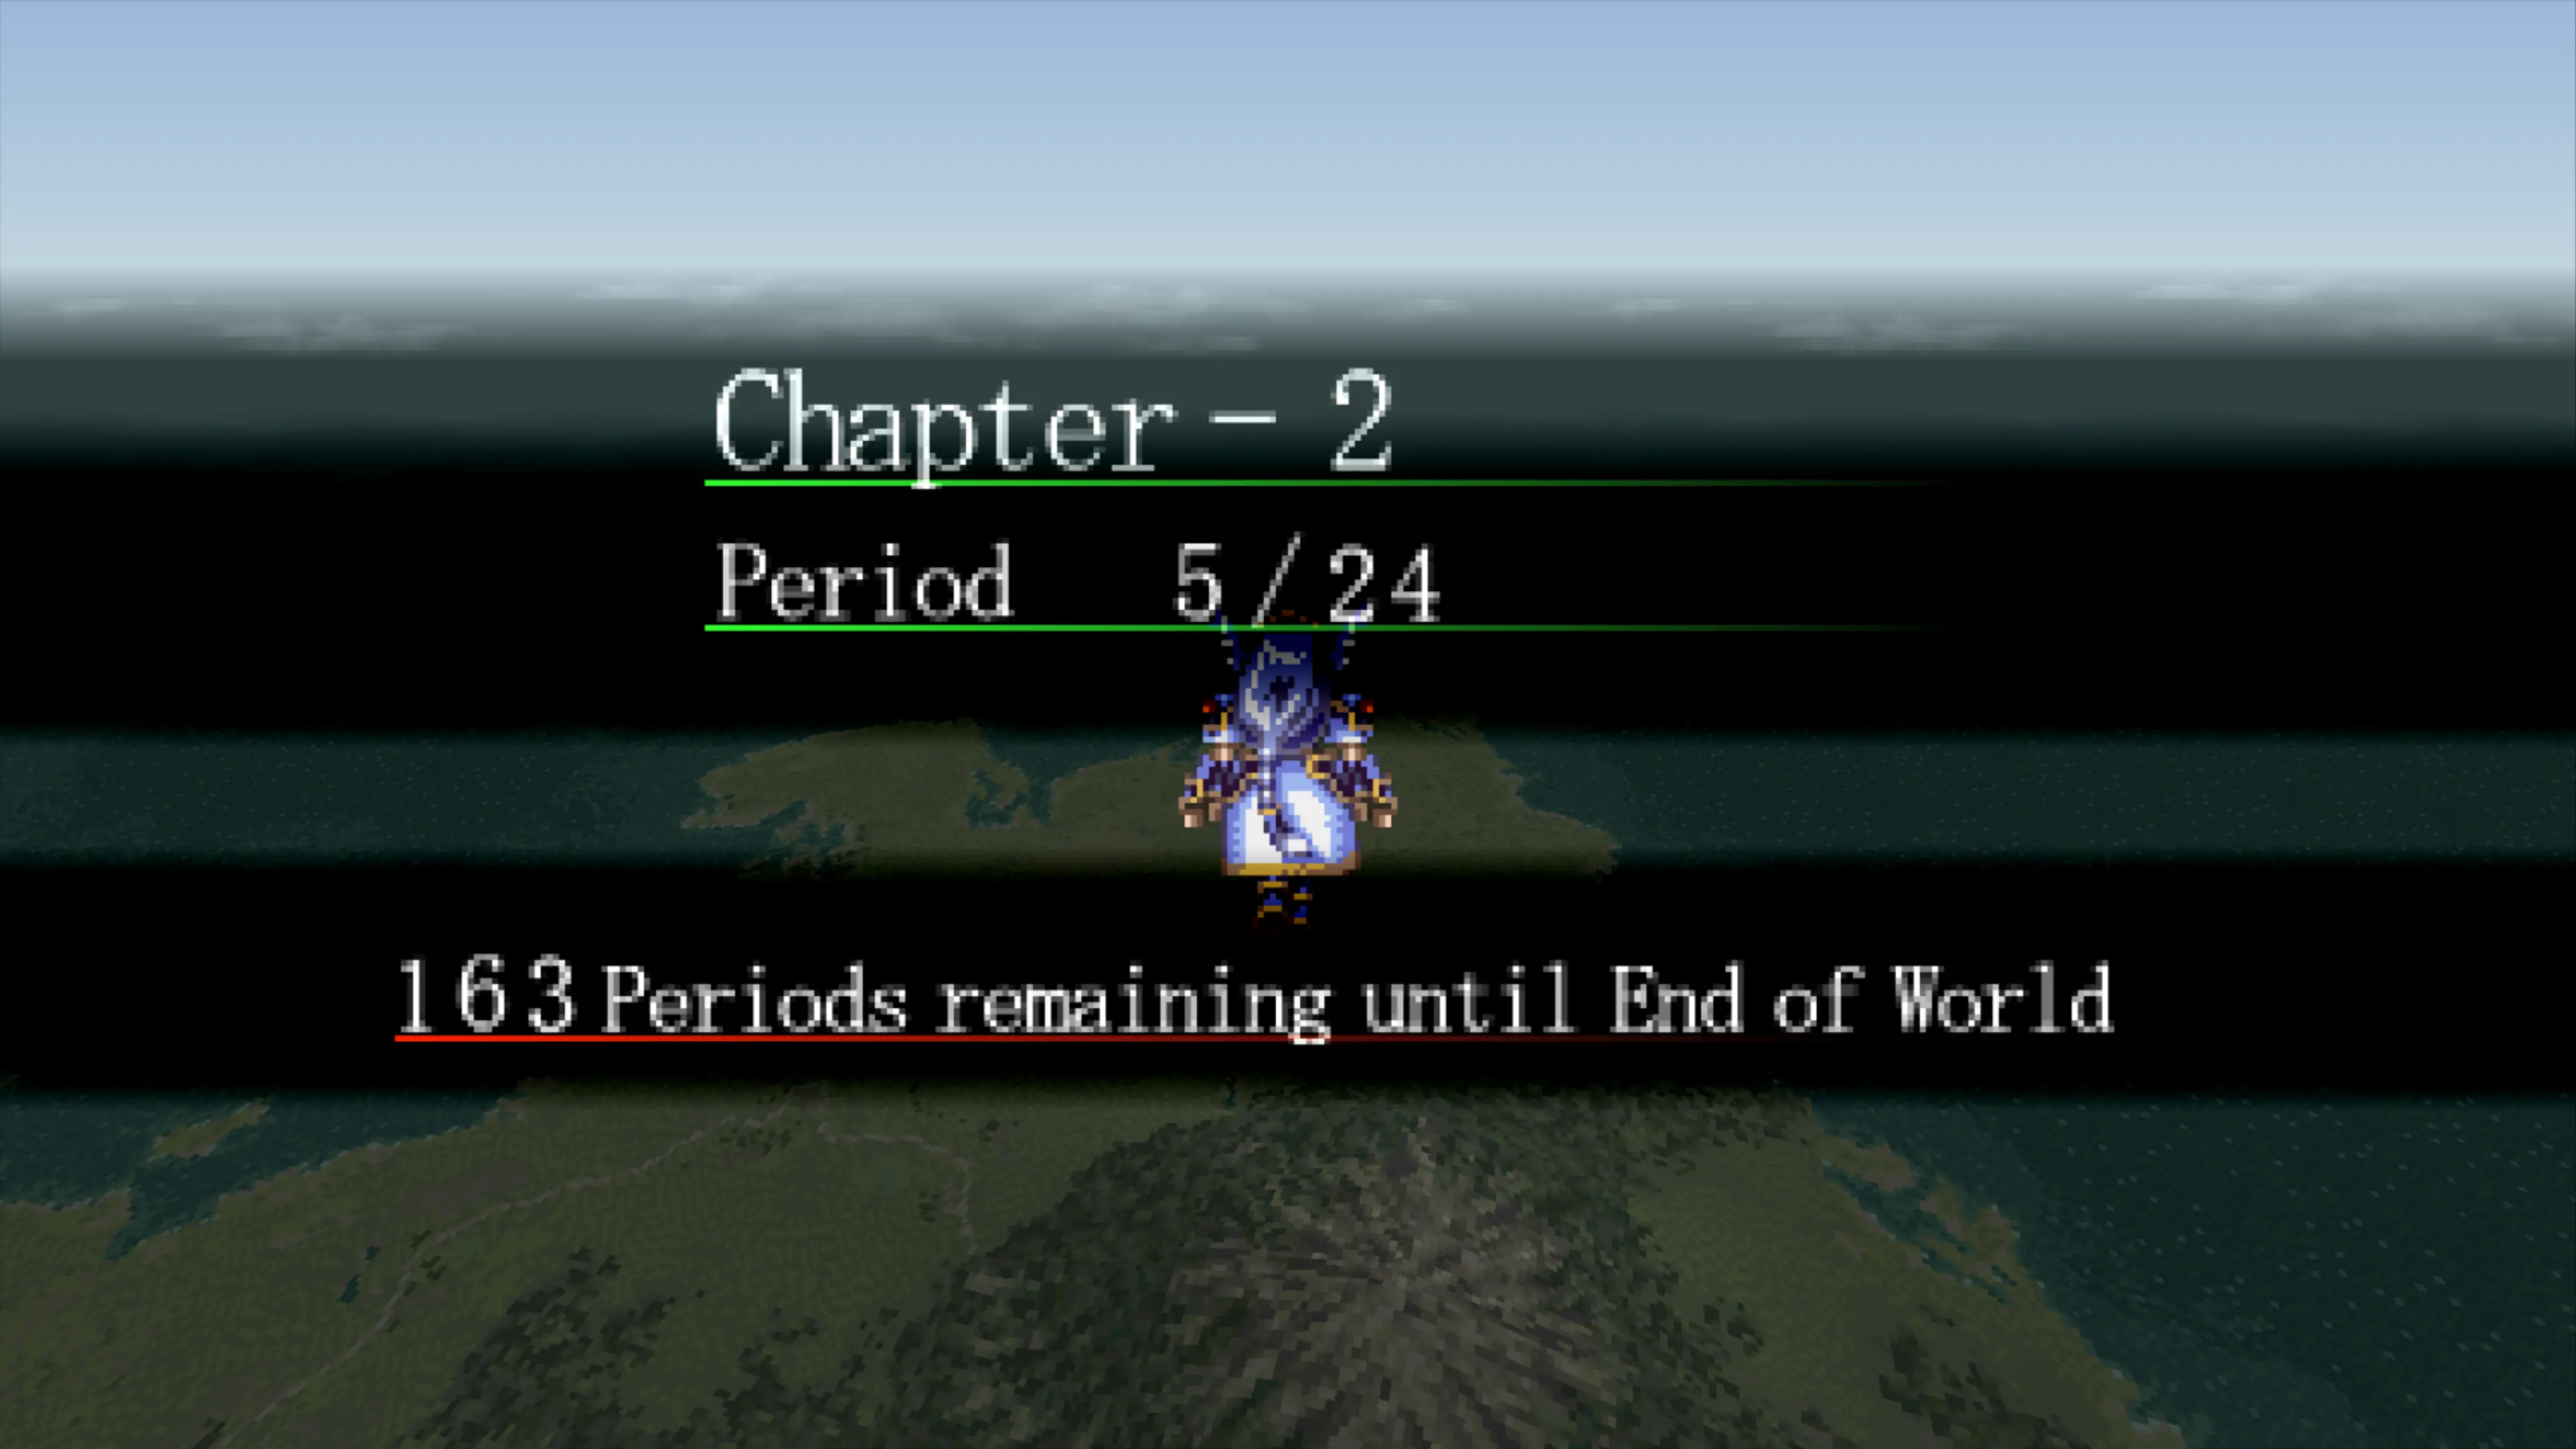 Valkyrie Profile depicting how much time remains until the end of the world